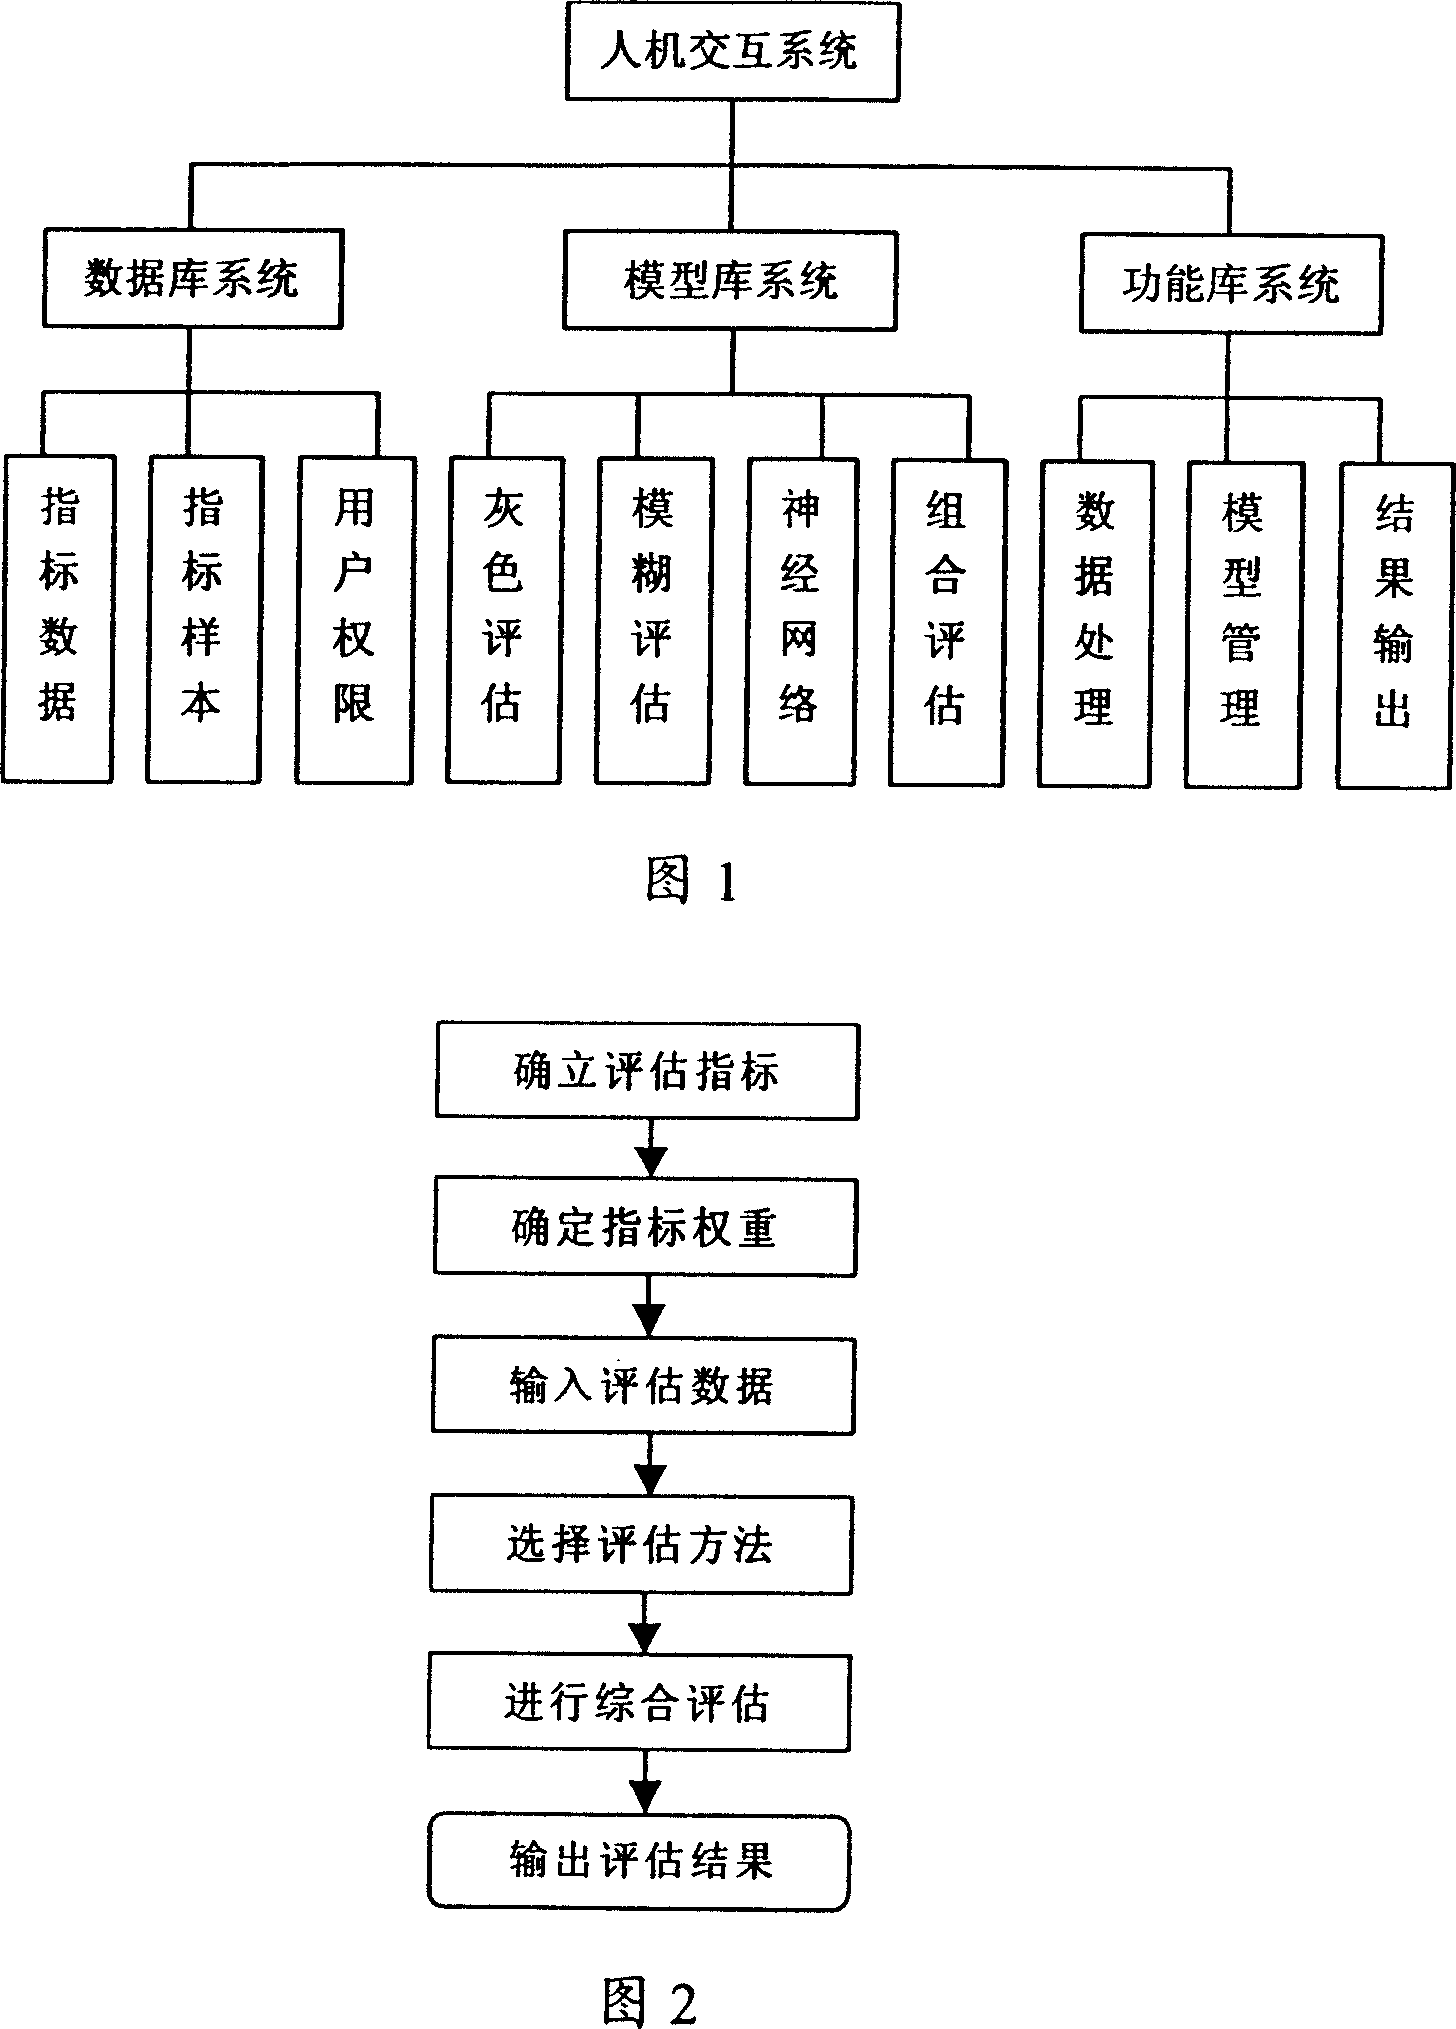 Network safety integrated estimation system